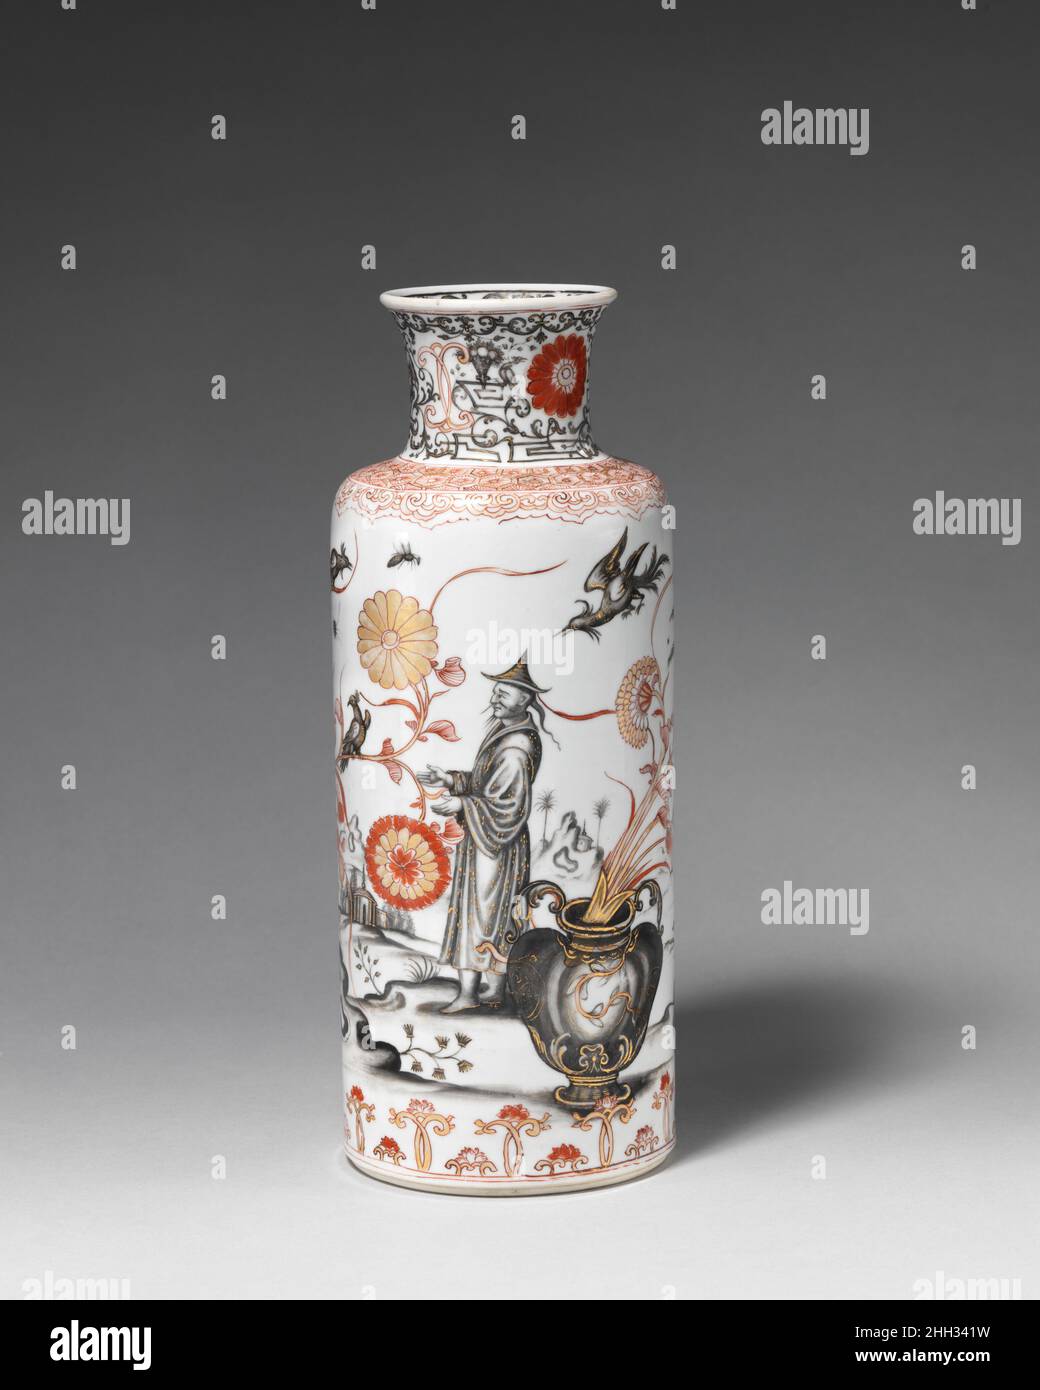 Vase (one of a pair) early 18th century, decoration ca. 1729–32 Decorated by the Hausmaler Ignaz Preissler This Chinese vase was initially decorated in red enamel and gilding, but after it was exported to Europe additional decoration in black enamel and gold was applied by Ignaz Preissler (1676–1753). The depiction of “Chinese” figures is typical of chinoiserie, a term used to describe the European fascination with the peoples of Asia and their fanciful evocation in European decorative arts.. Vase (one of a pair). Chinese with Bohemian, Kronstadt decoration. early 18th century, decoration ca. Stock Photo